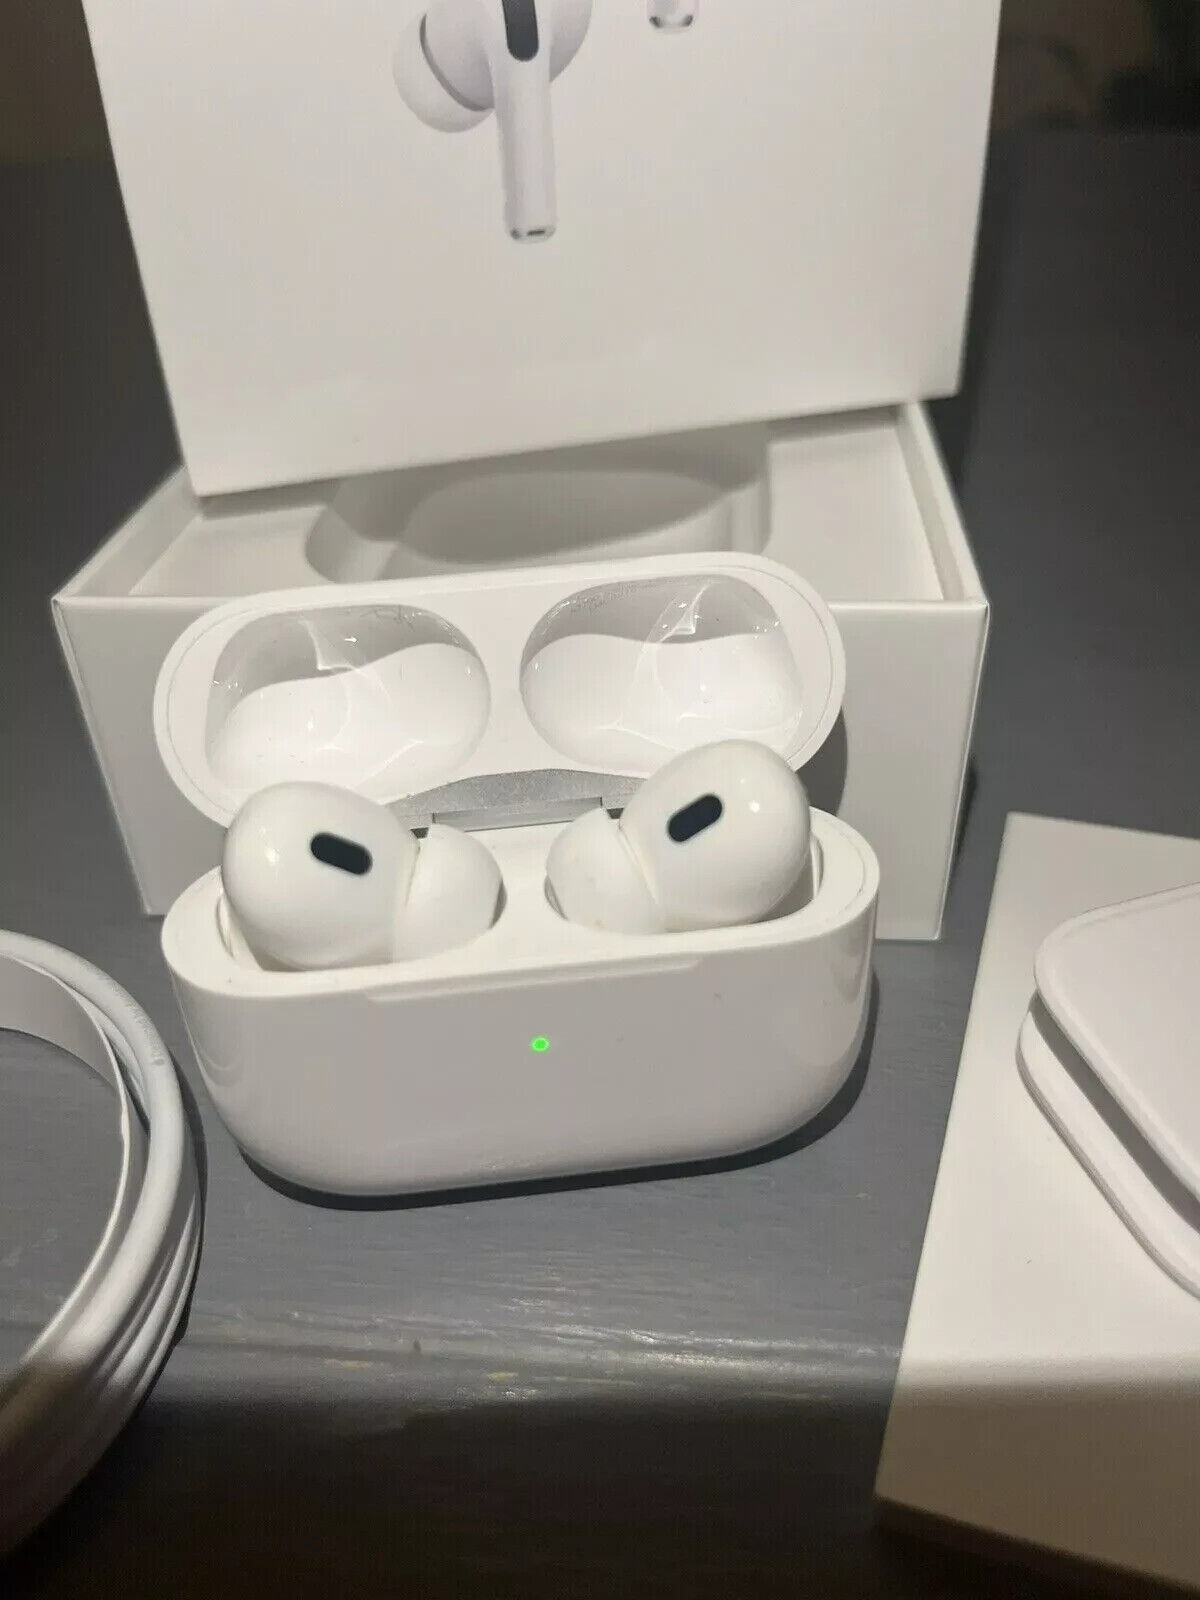 NEW Apple Airpods Pro （2nd generation）Earbuds Earphones with Charging Case